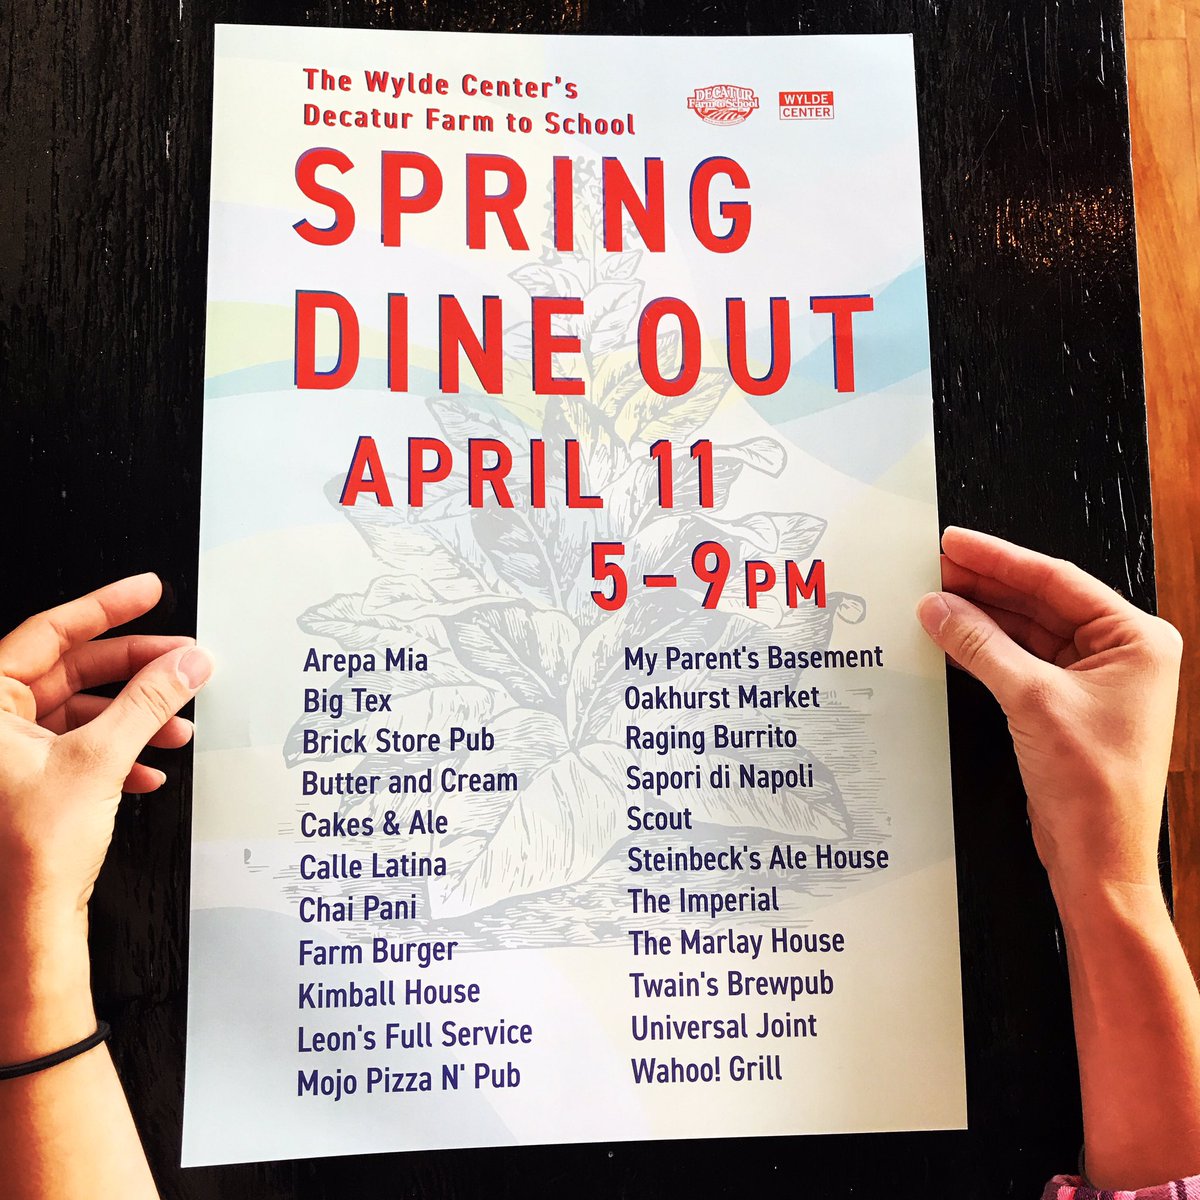 Do you really need an excuse to dine out tonight? Proud to be participating in the 2018 #SpringDineOut. Stop by to support an awesome cause. 
.
.
.
.
.
.
.
.
#chaipanidecatur #decaturfarmtoschool #atleats #indianstreetfood #foodinatlanta